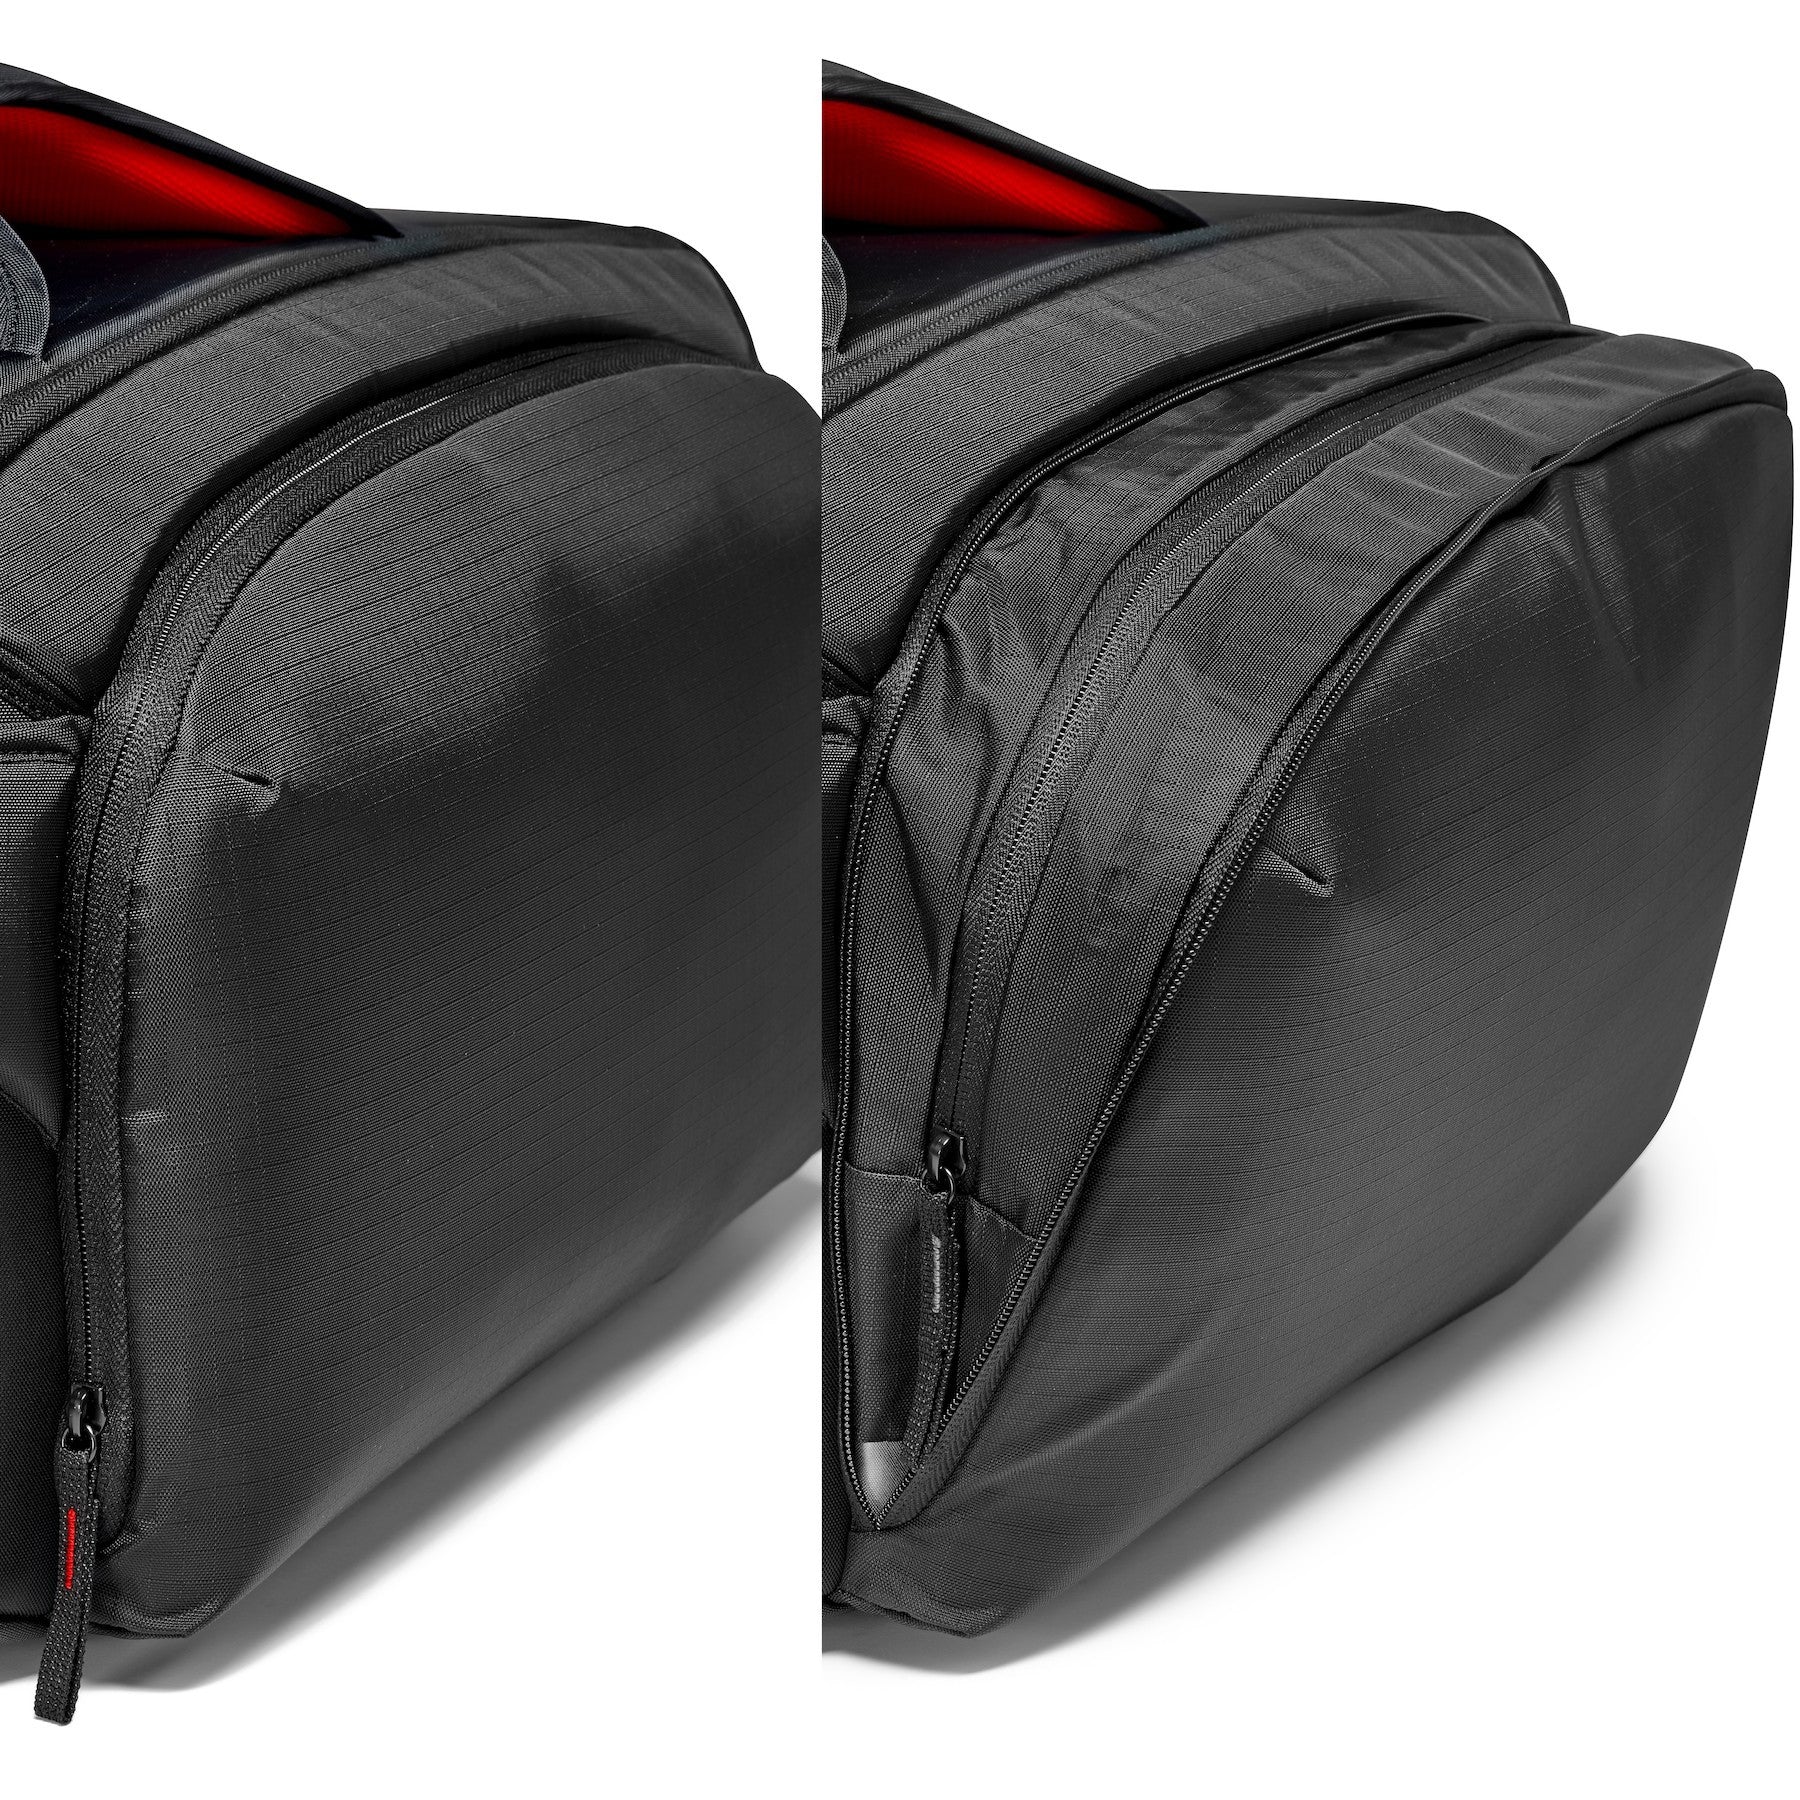 Manfrotto CC-192N Pro Light Video Case, bags shoulder bags, Manfrotto - Pictureline  - 4